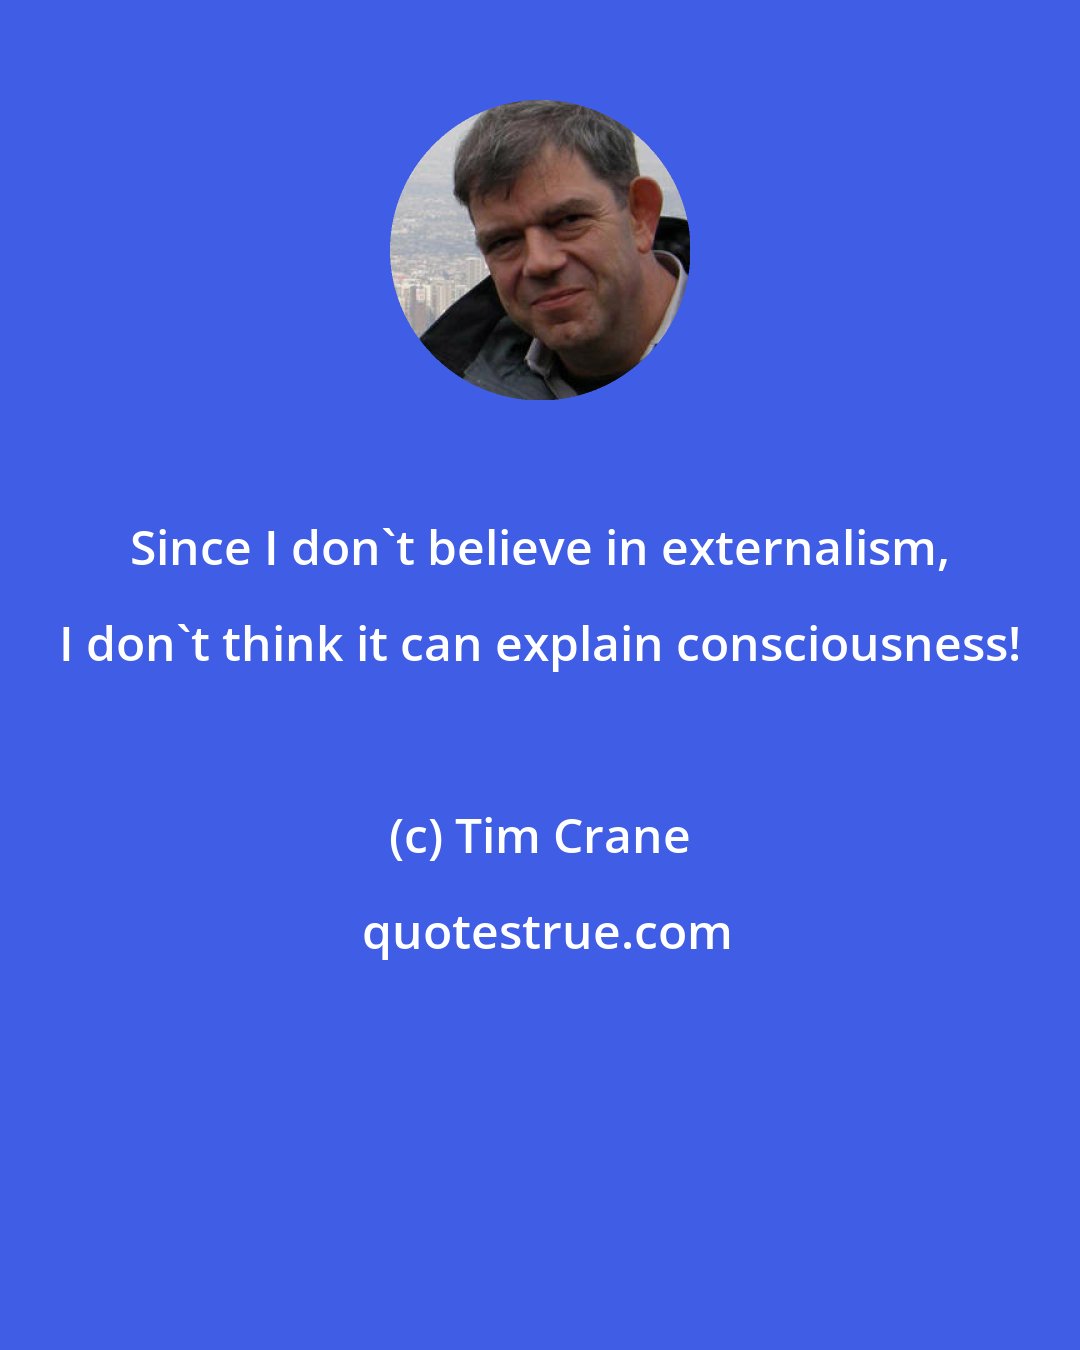 Tim Crane: Since I don't believe in externalism, I don't think it can explain consciousness!